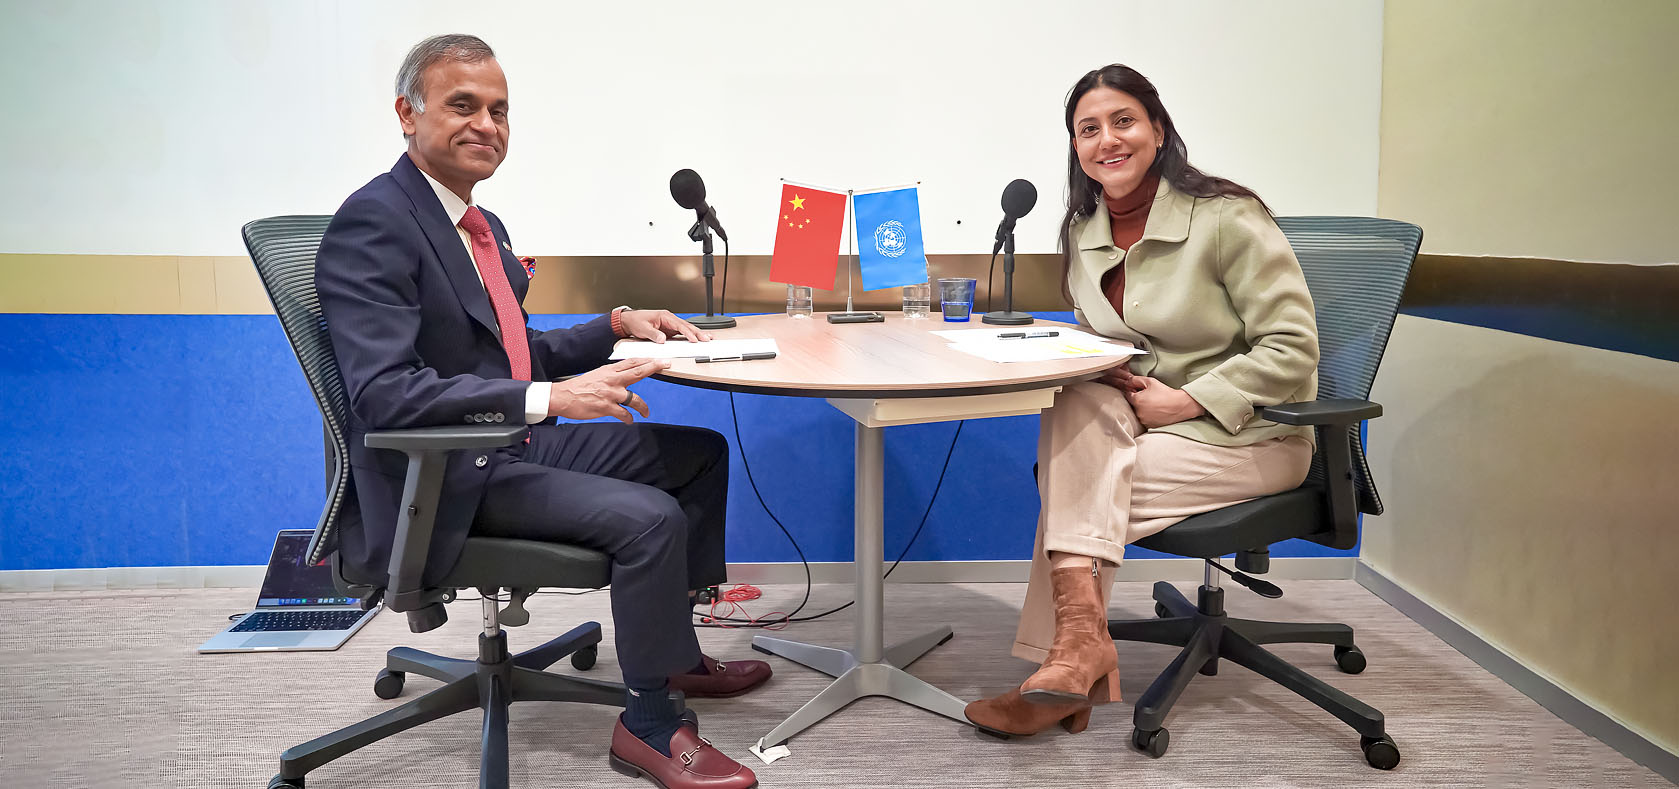 [from left] Siddharth Chatterjee and Smriti Aryal sit on a their chairs around the table with Microphones, ready for doing podcast. They are facing the camera. Photo taken for UN Women by Zhao Wenting